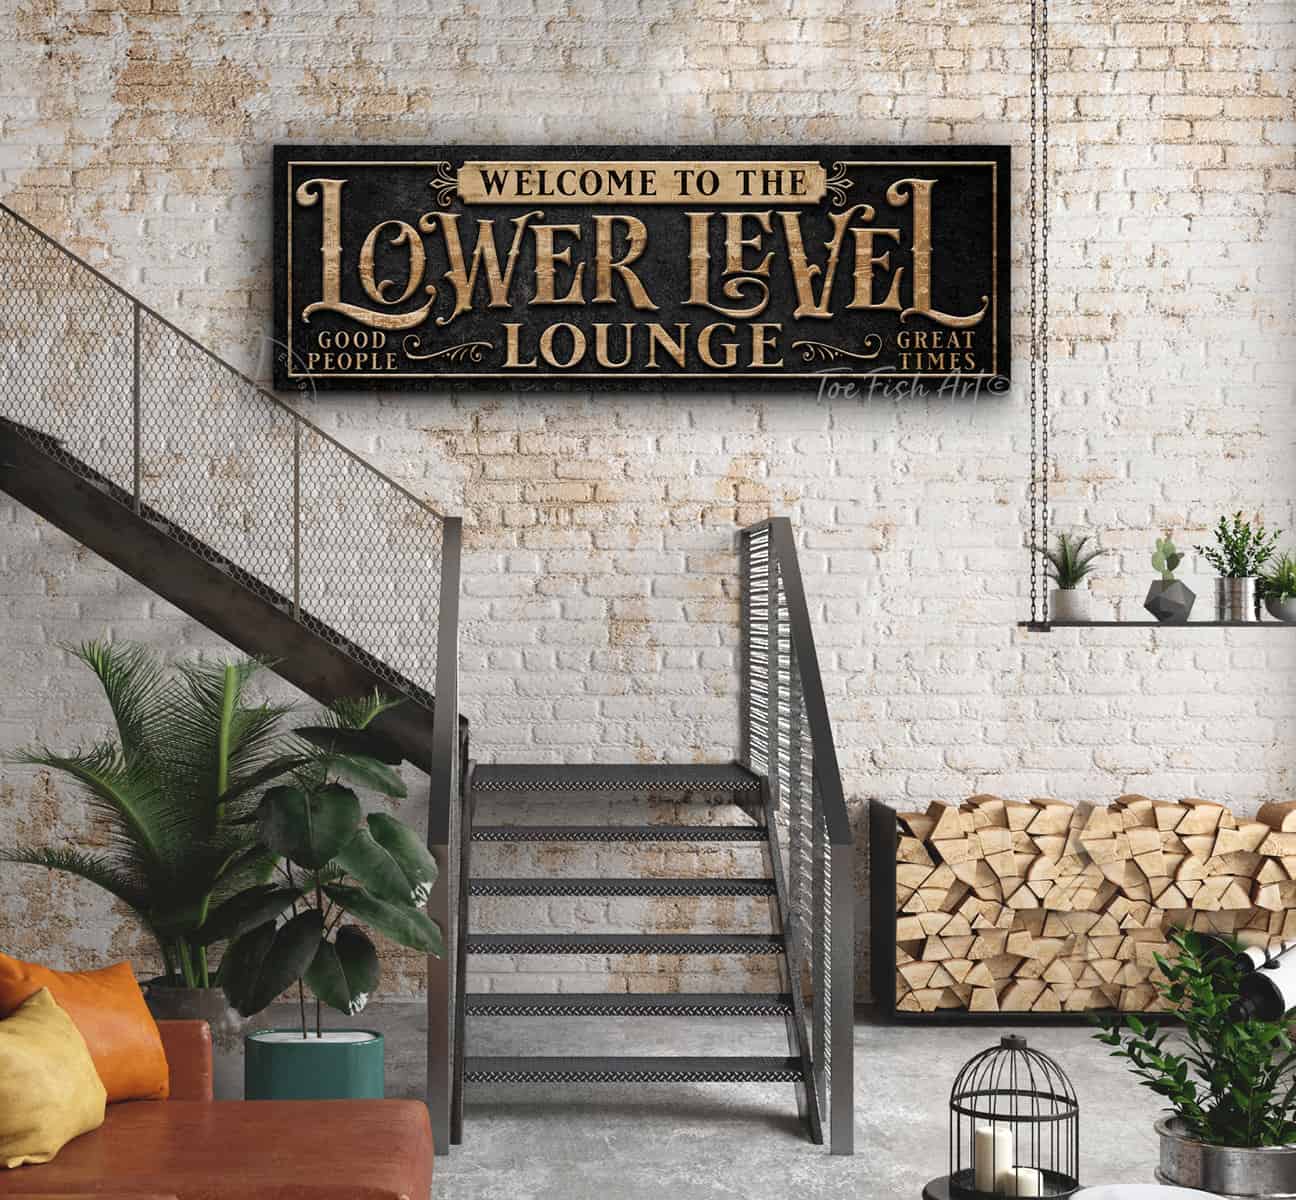 Personalized Lower Level Lounge Sign handmade by ToeFishArt. Original, custom, personalized wall decor signs. Canvas, Wood or Metal. Rustic modern farmhouse, cottagecore, vintage, retro, industrial, Americana, primitive, country, coastal, minimalist.